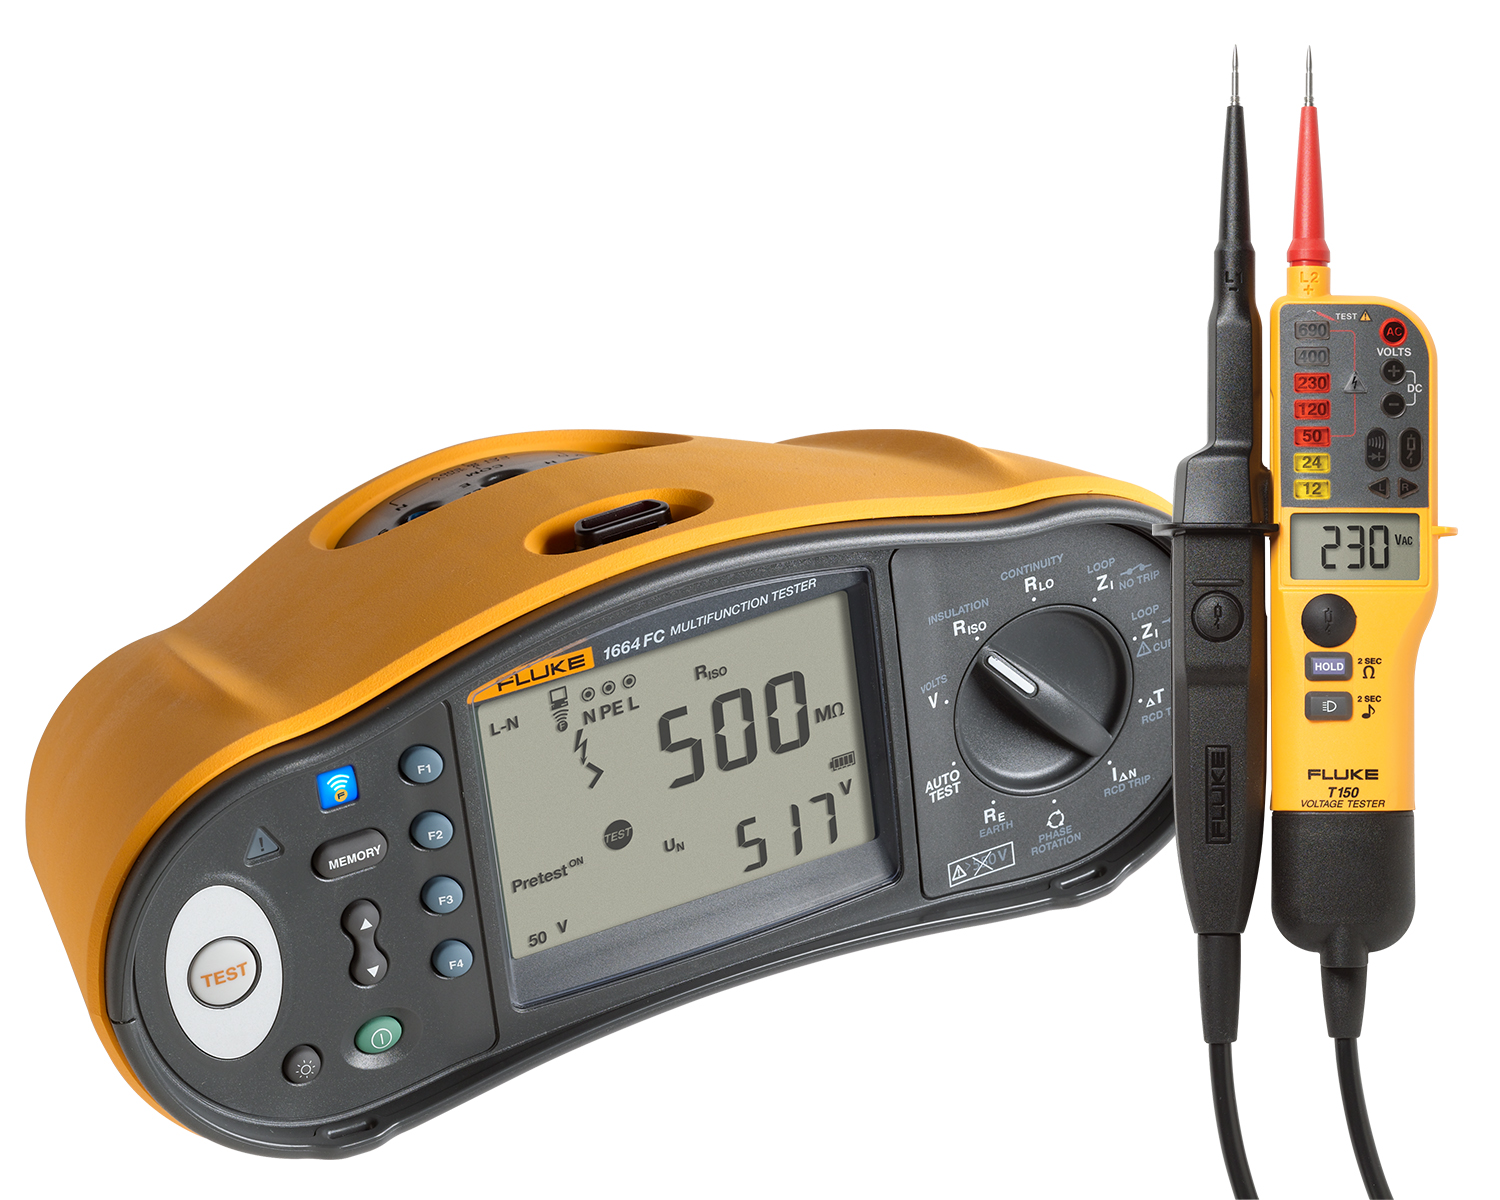 Fluke 1664 FC Multifunction Installation Tester plus a T150 Electrical Tester.